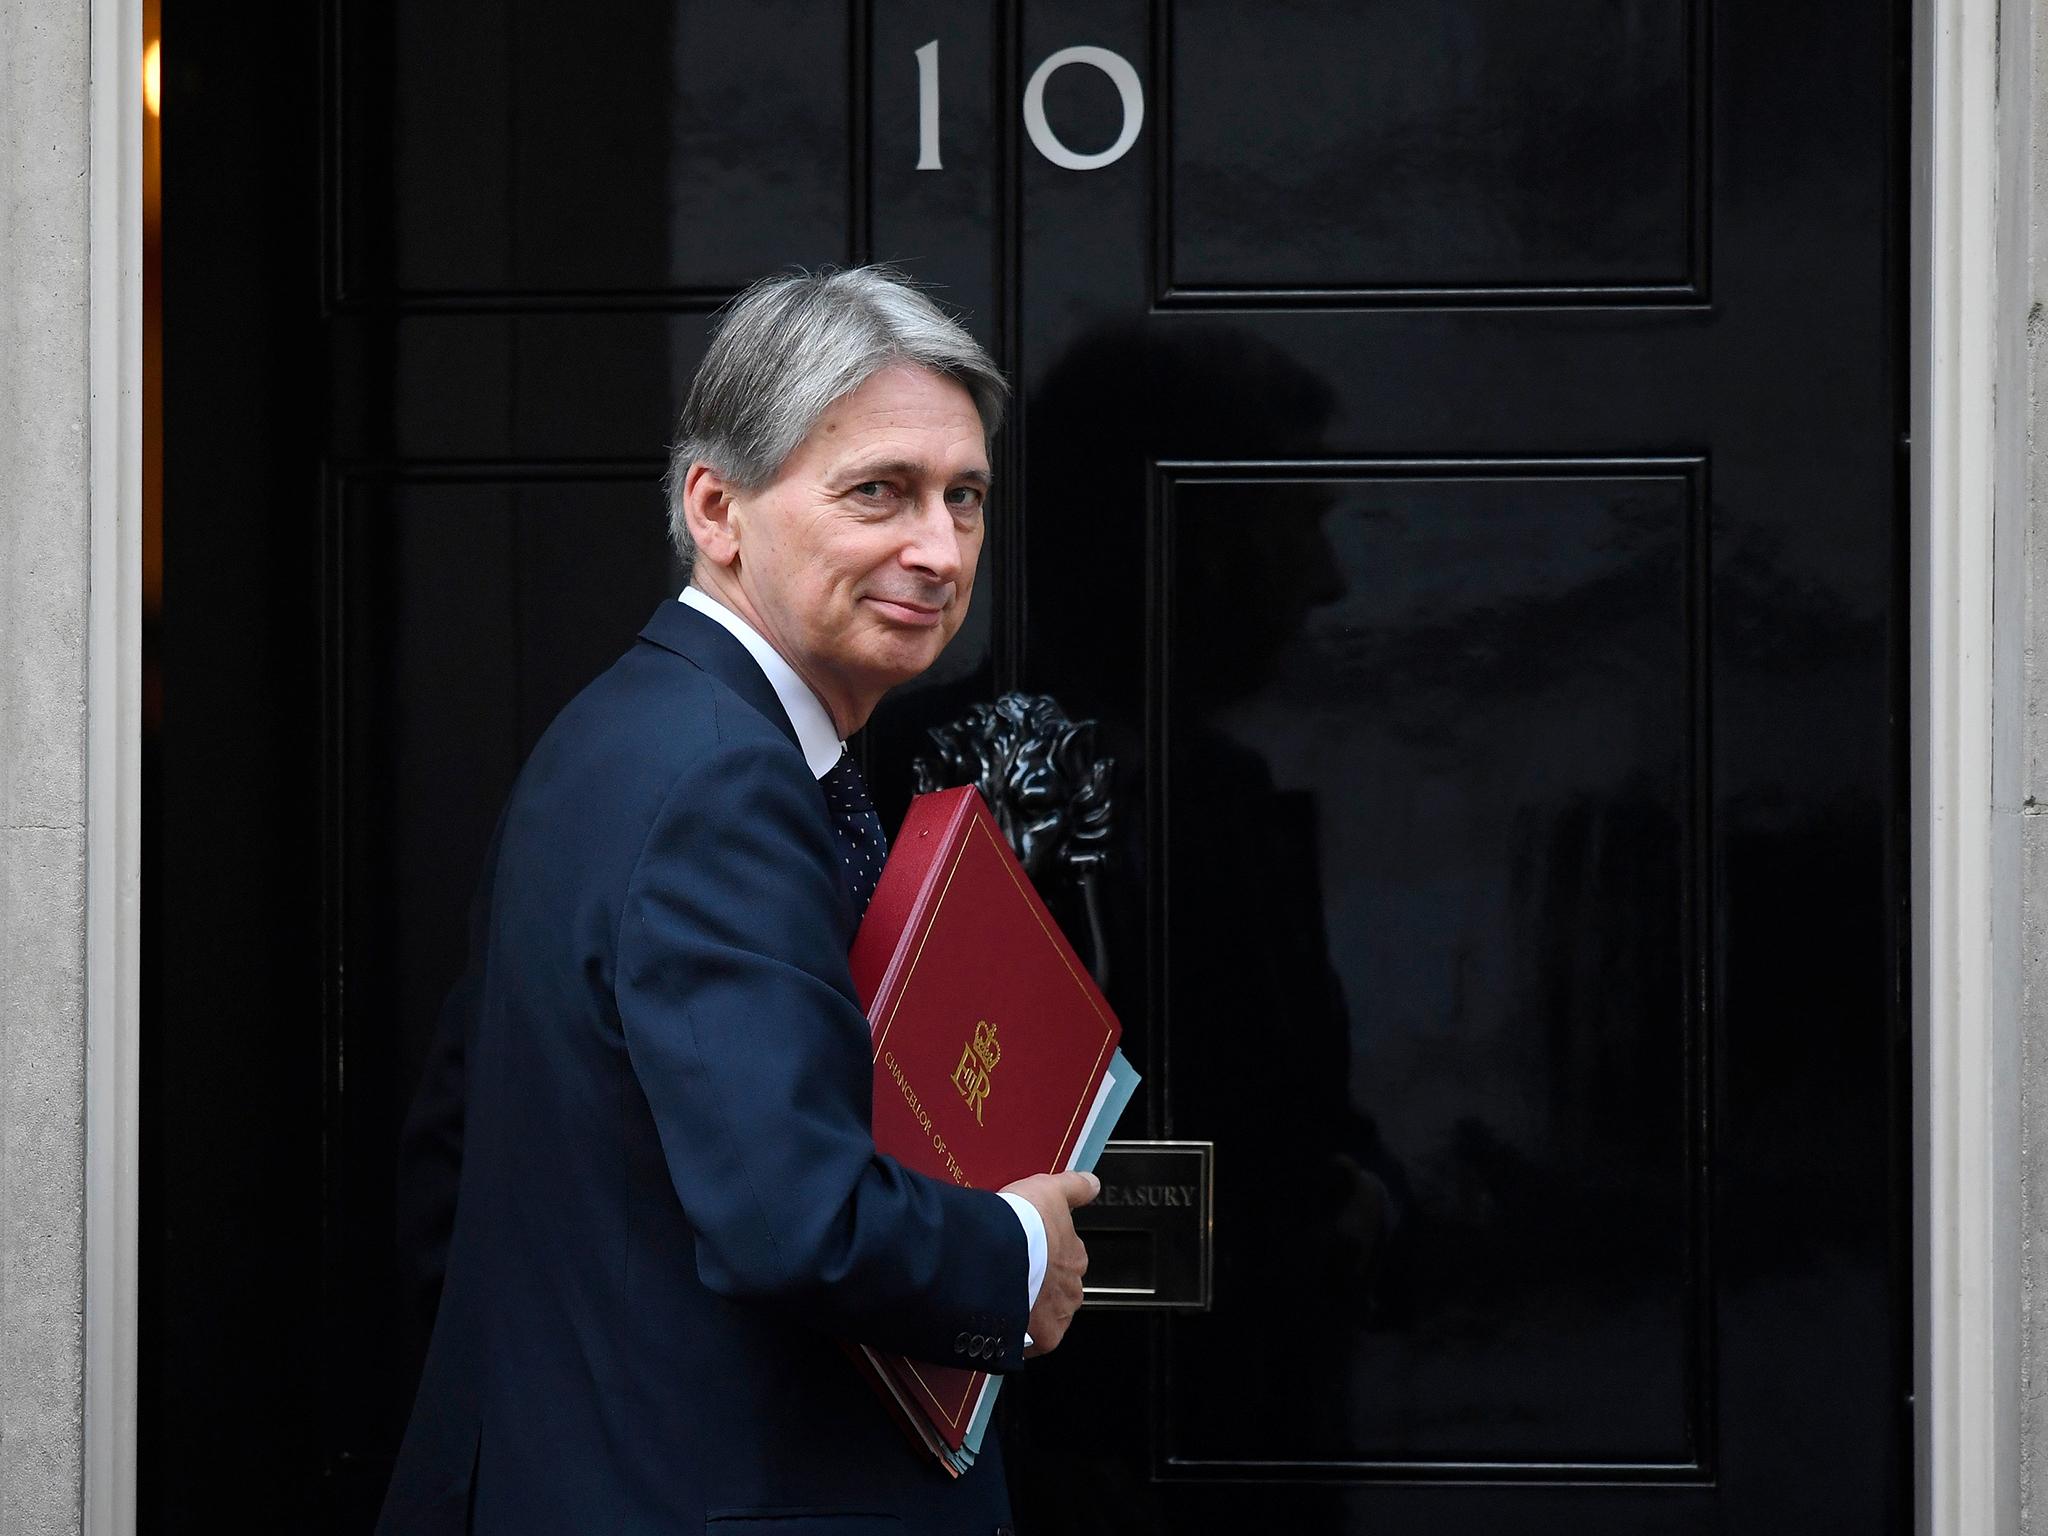 Chancellor Philip Hammond arriving at 10 Downing Street in London